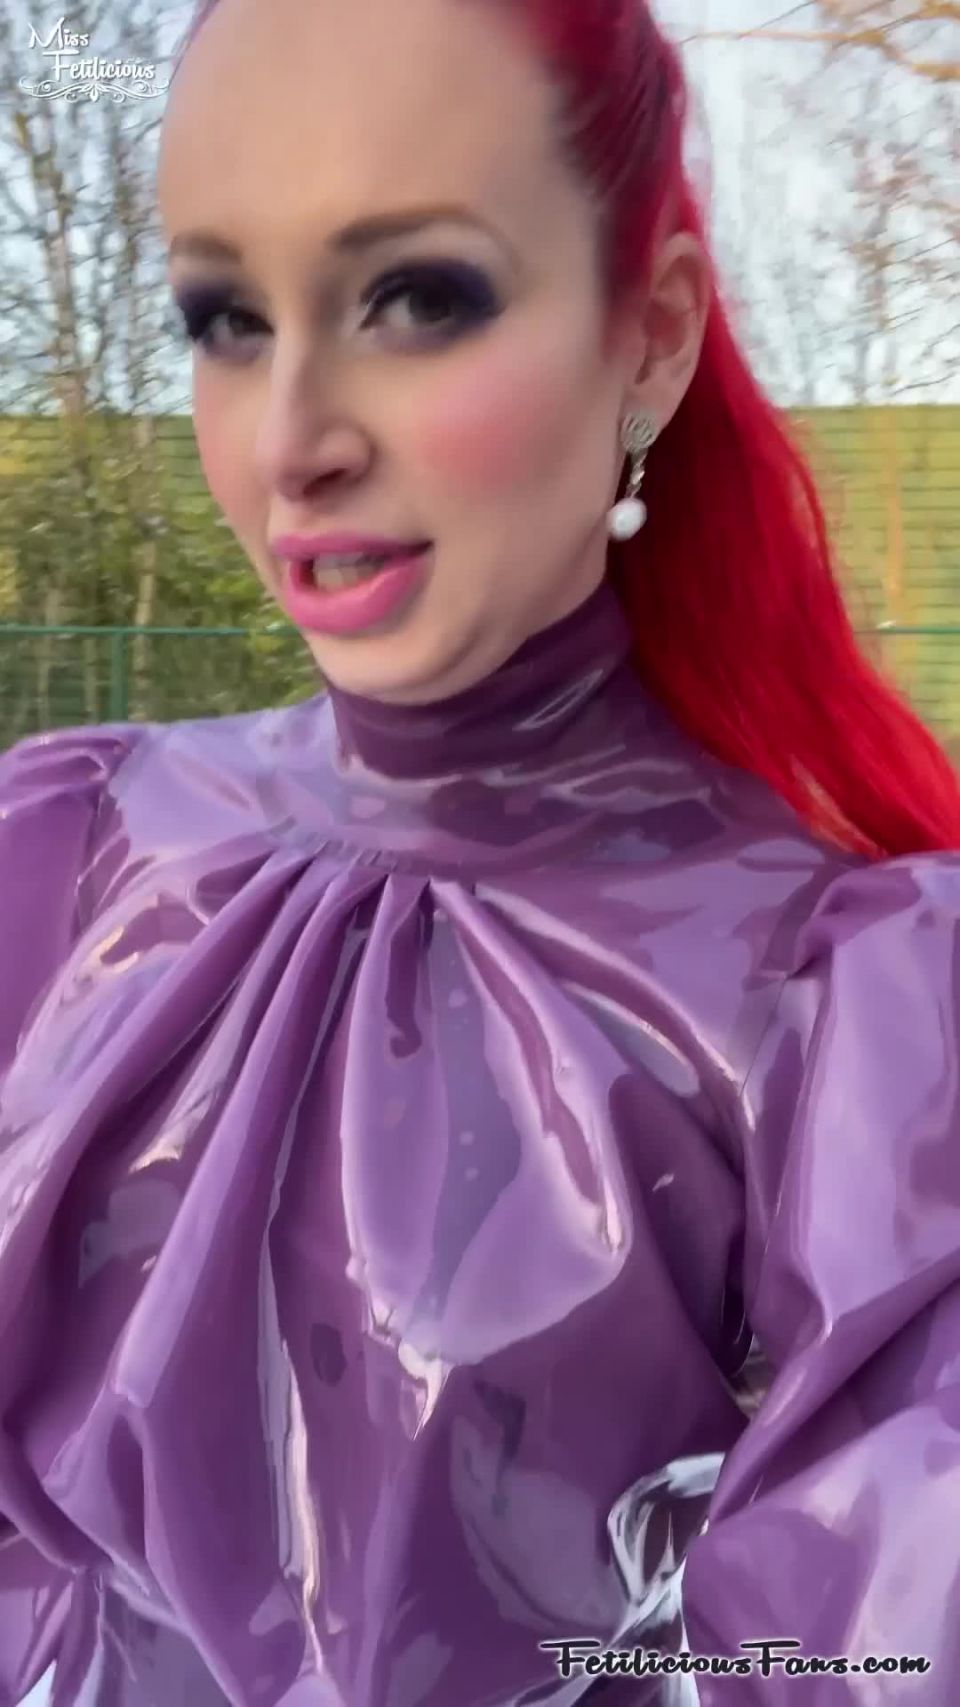 FetiliciousFans SiteRipPt 2Purple Latex Girl in the Snow